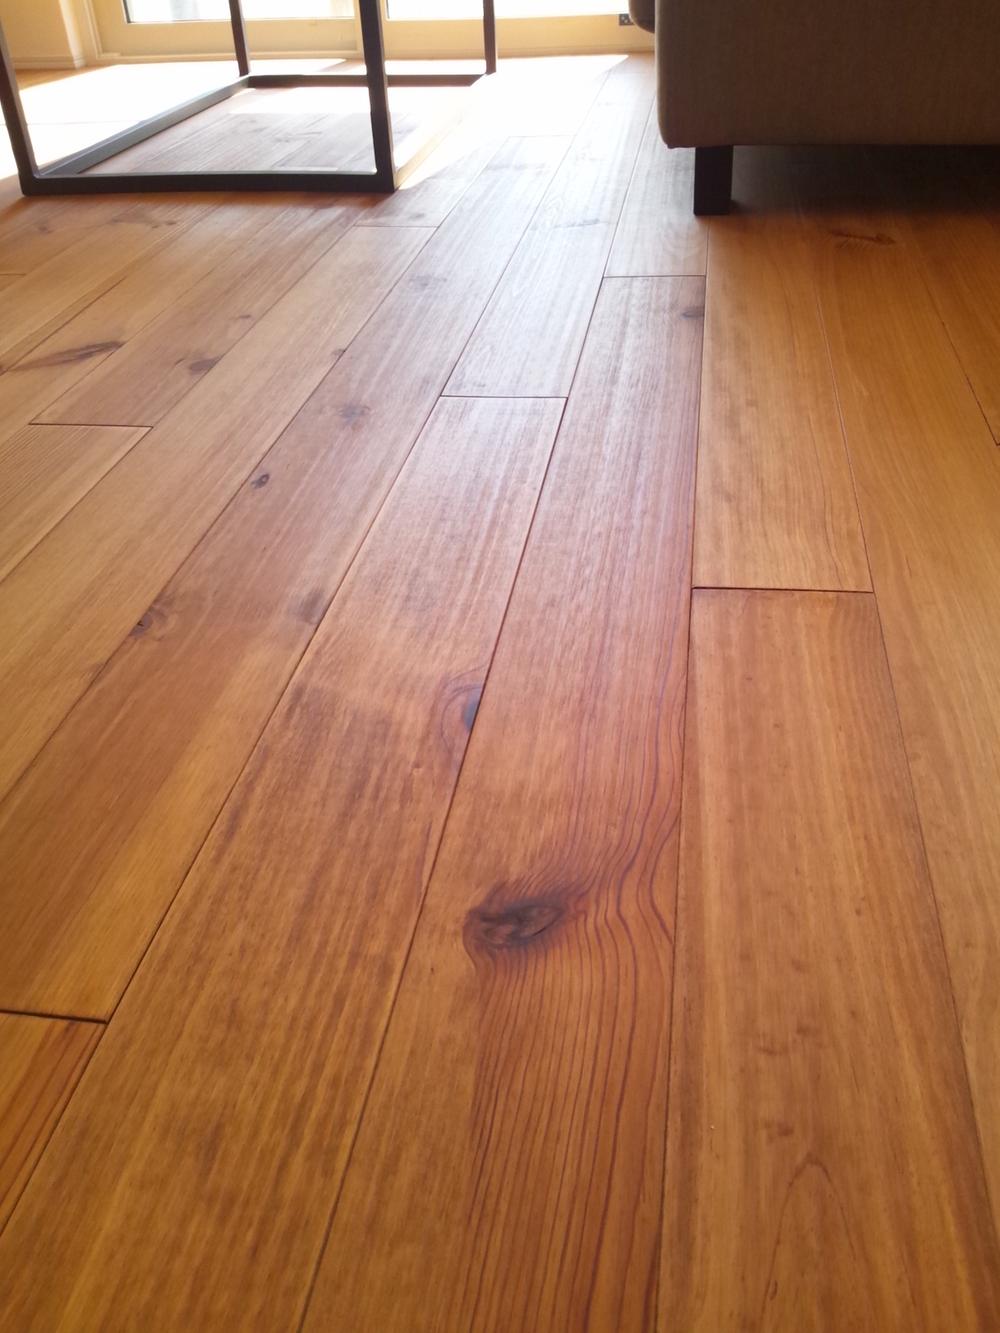 Same specifications photos (Other introspection). Flooring is solid pine. 